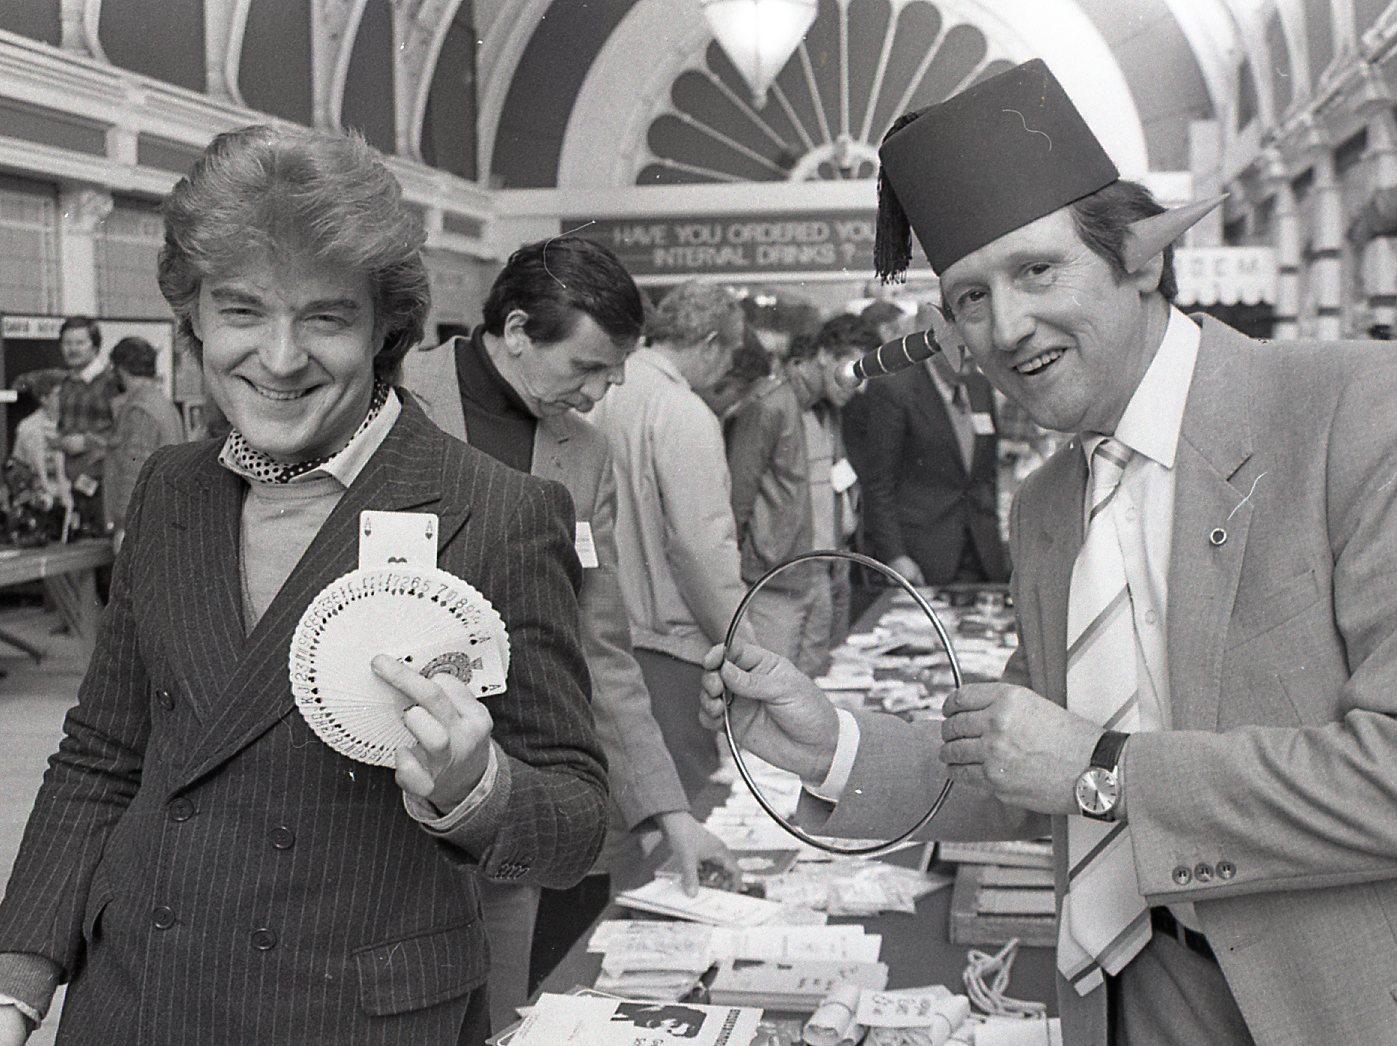 Preston-born magician Johnny Hart (left), who has performed at the MGM Grand Hotel in Las Vegas, came down to earth with a bump at the magicians convention in Blackpool. Pictured above Johnny compares notes with Tom Owen from Blackpool